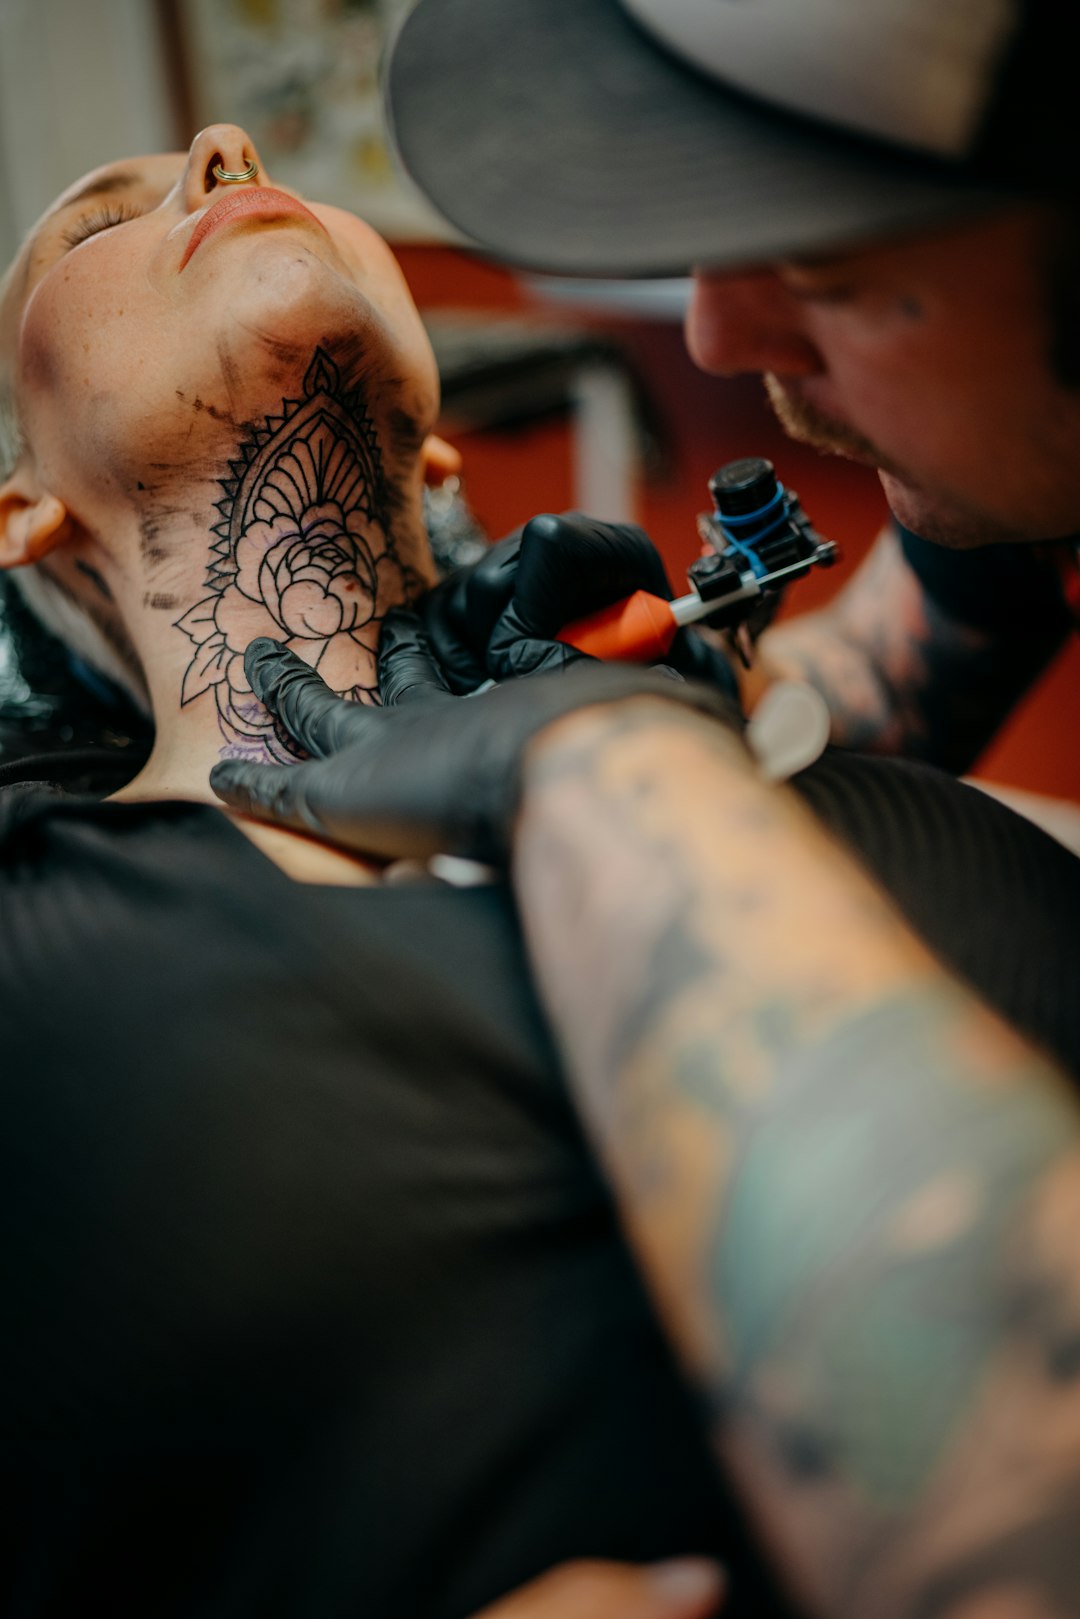 Finding the Best Tattoo Studio: Tips for Choosing a Trusted Artist